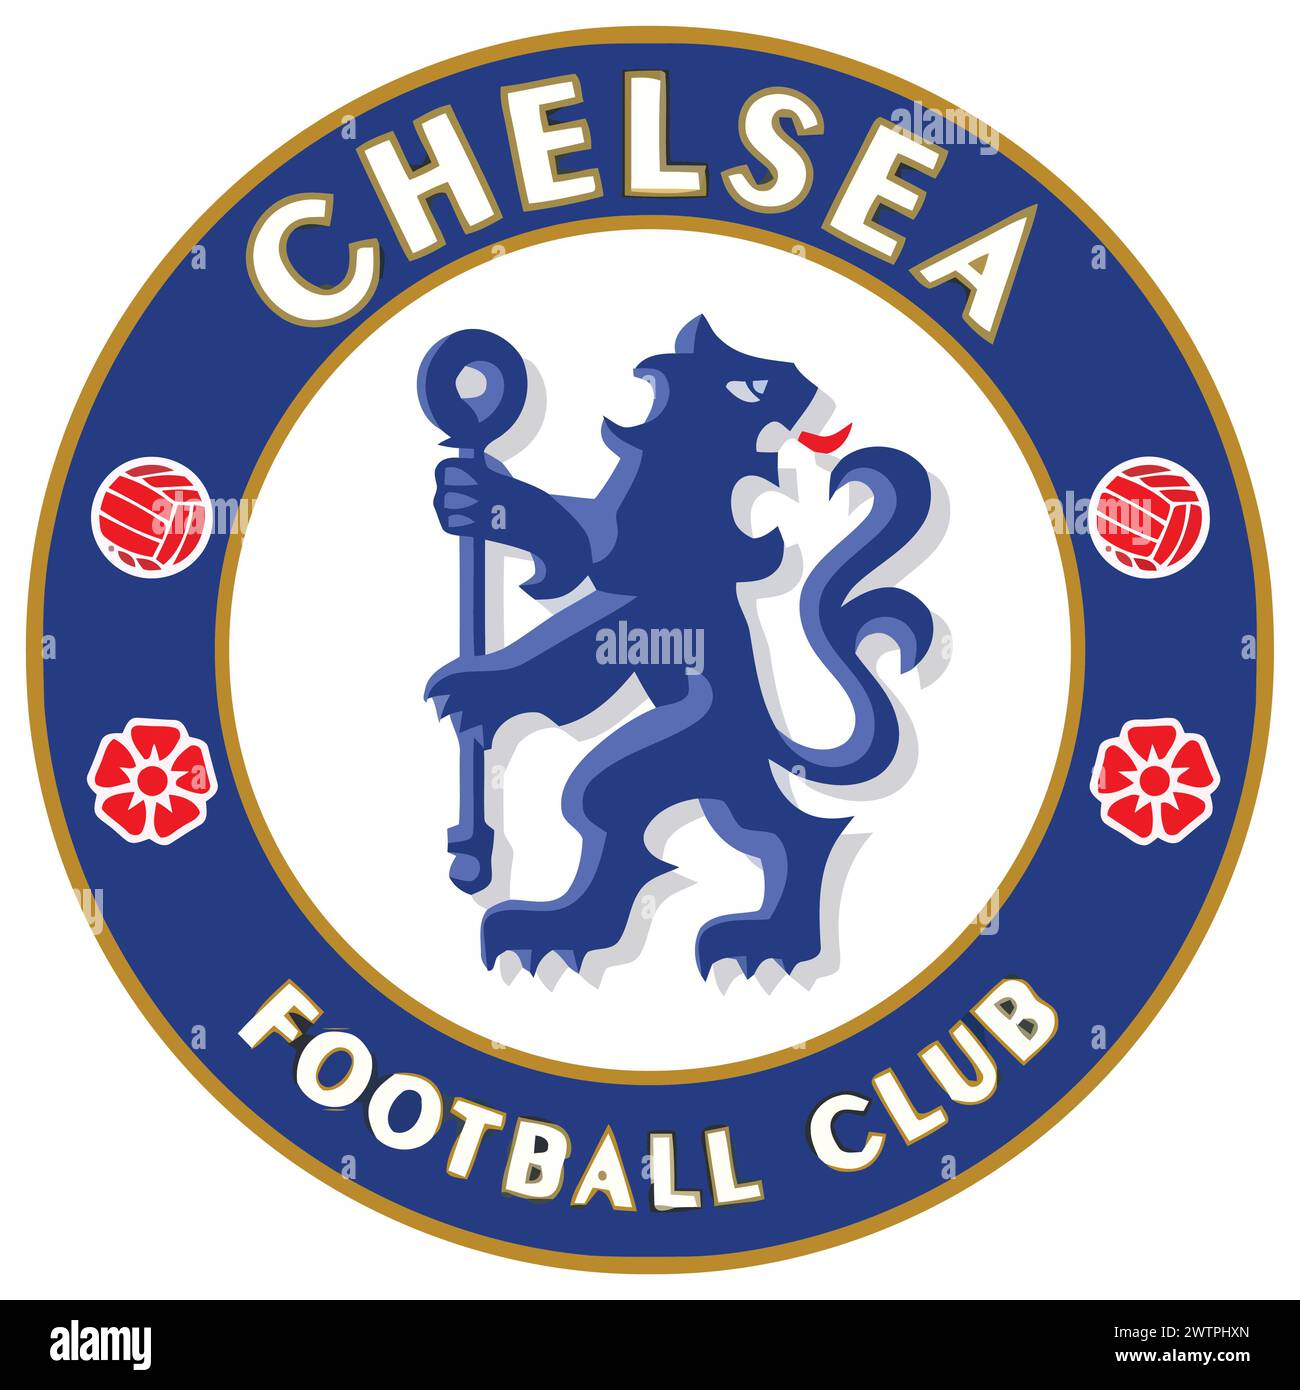 Chelsea logo prepared and cleaned in vector Stock Vector